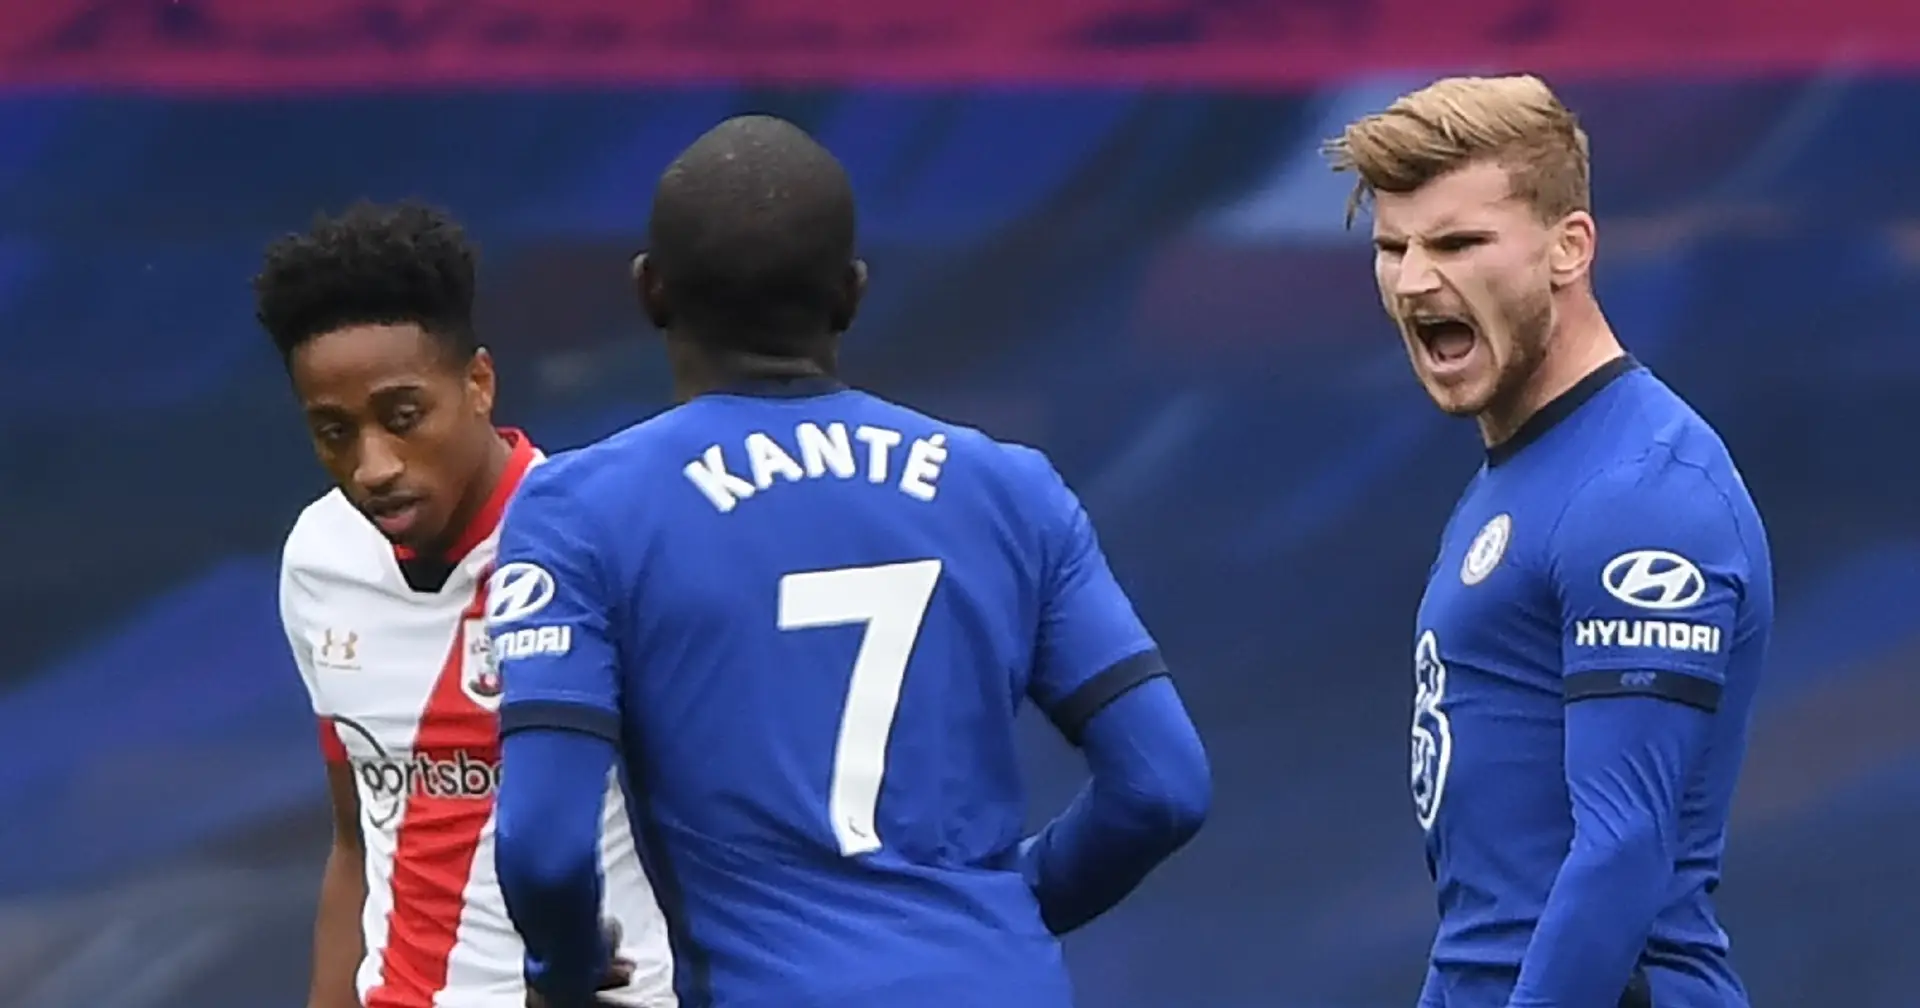 Southampton vs Chelsea: Team news, probable line-ups, score predictions, and more - preview